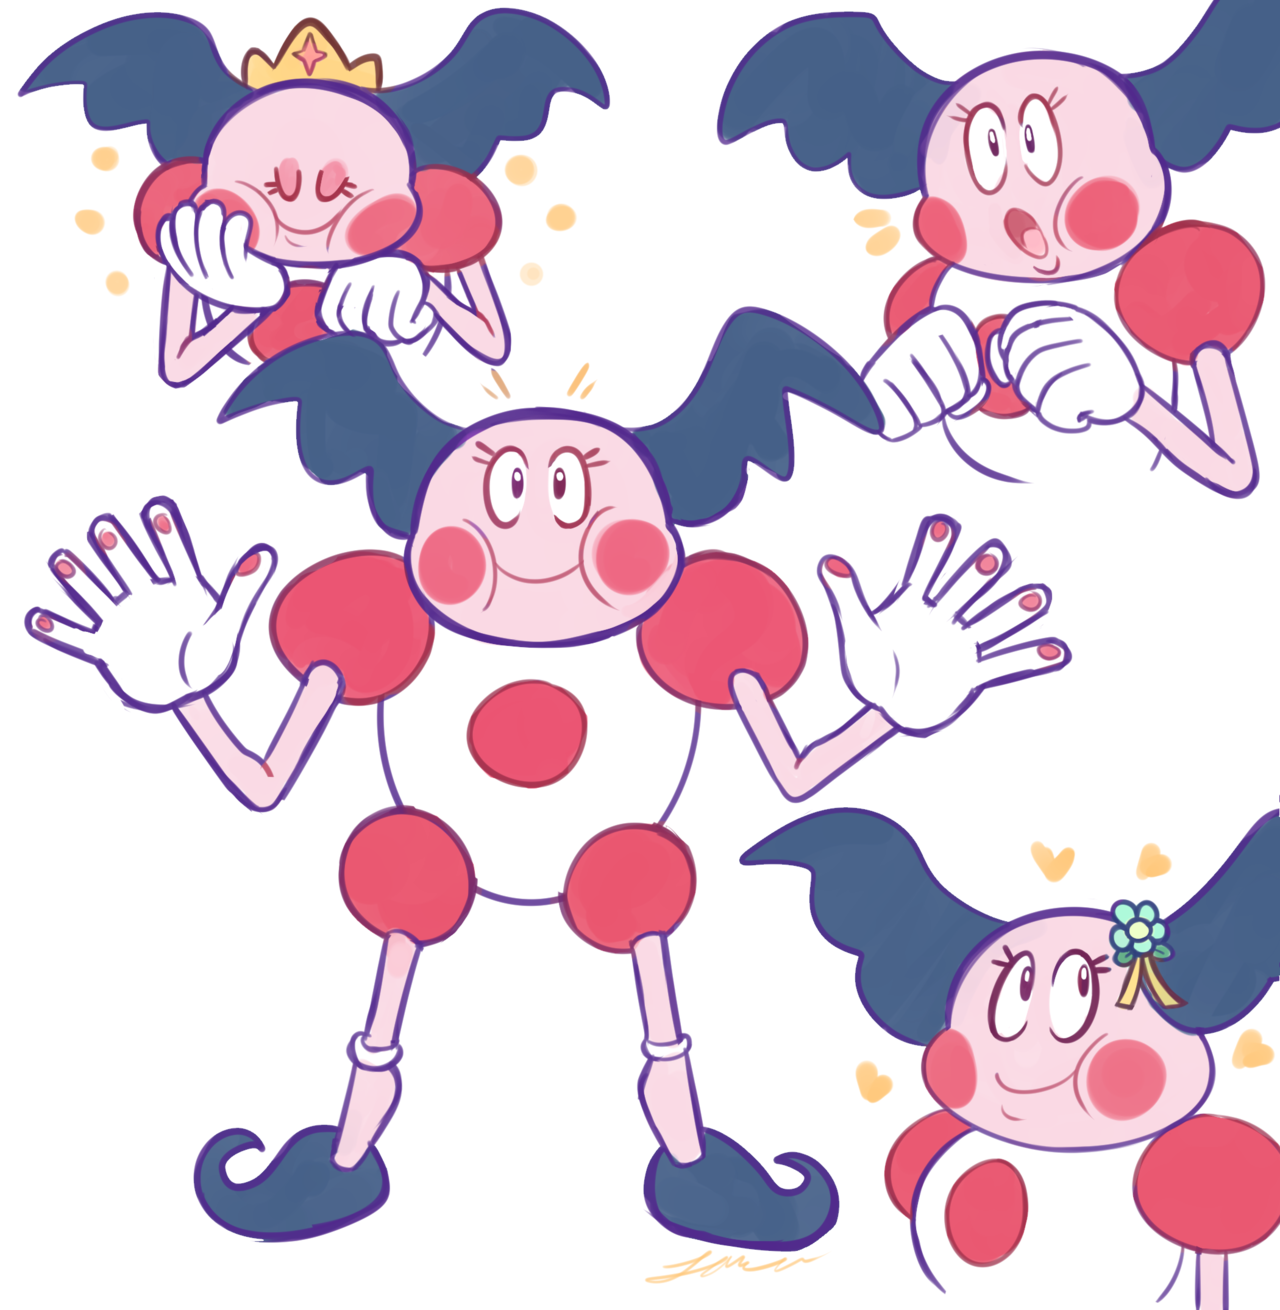 I didn’t actually know Mr Mimes could be female until I caught her as a Mim...